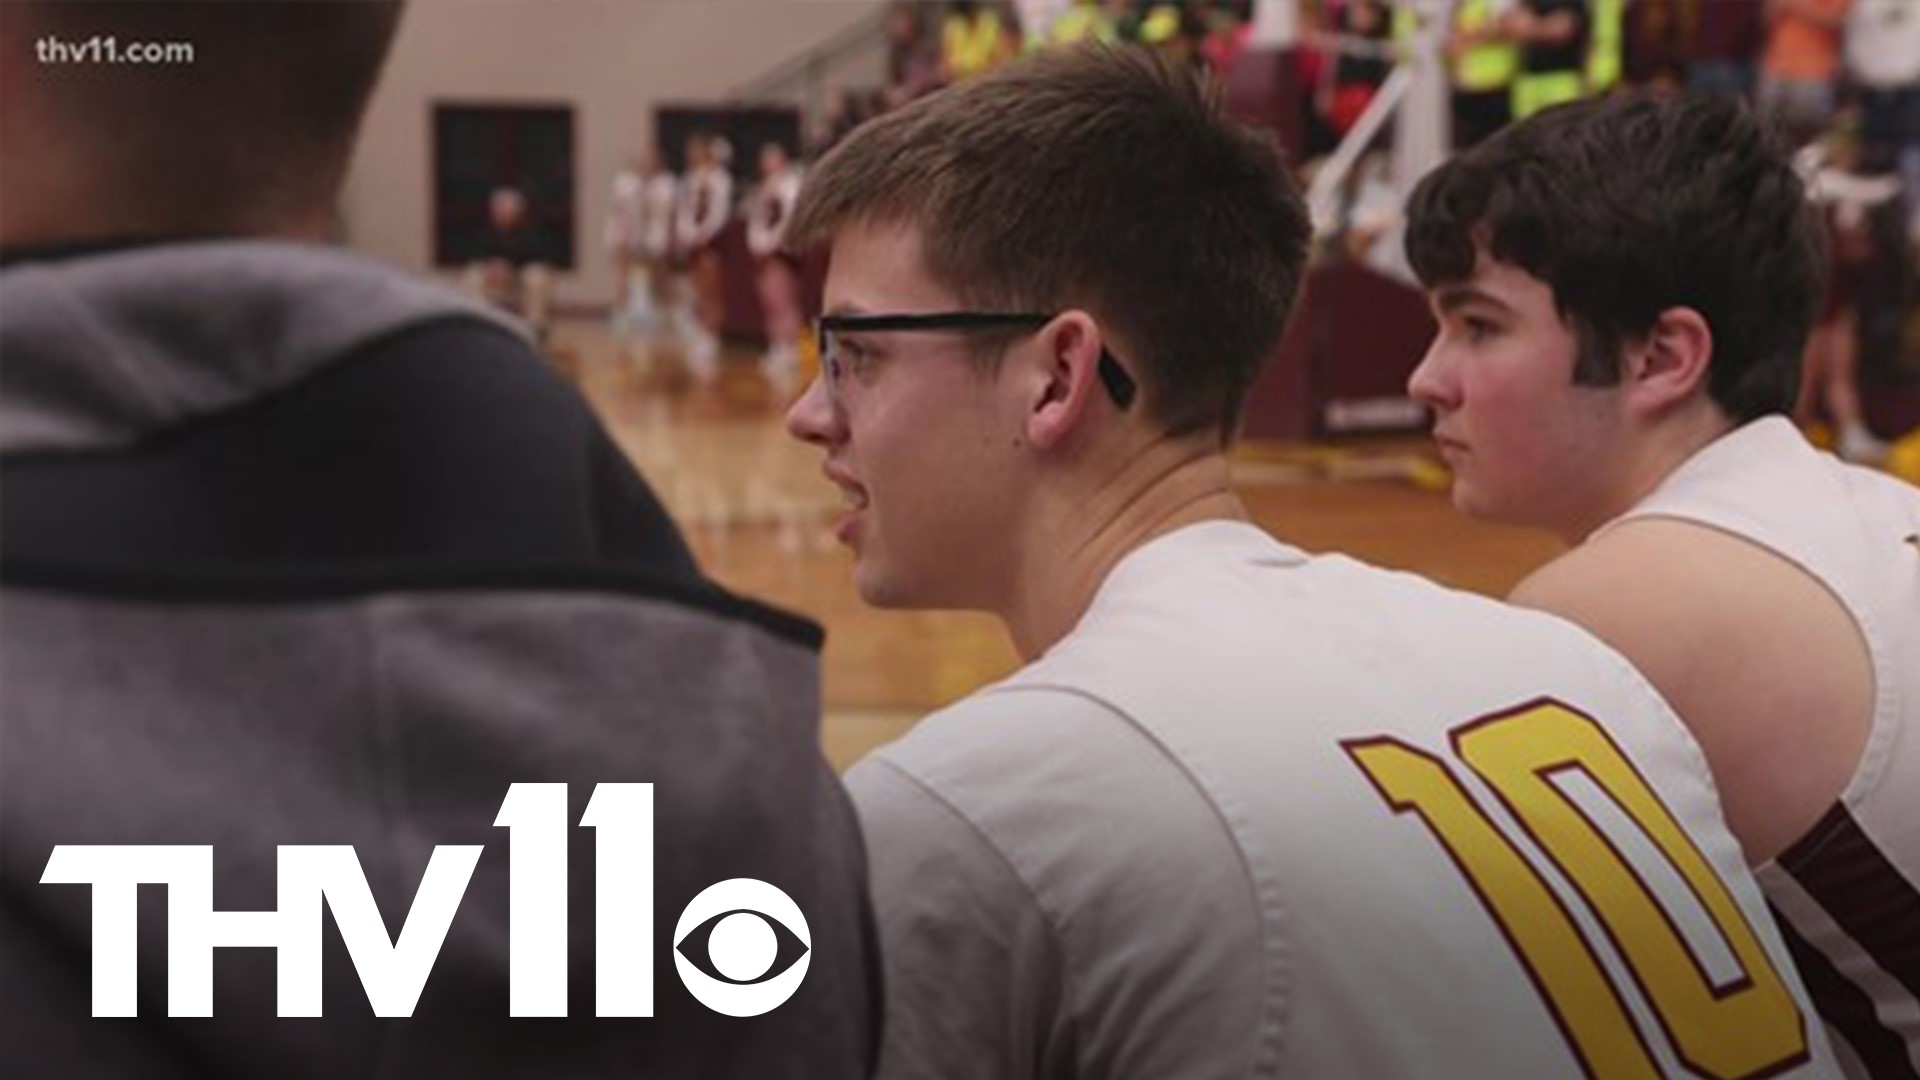 It's almost playoff season for high school basketball. Tonight, as Lake Hamilton hopes to end their season on a high note, they sought help from the sidelines.